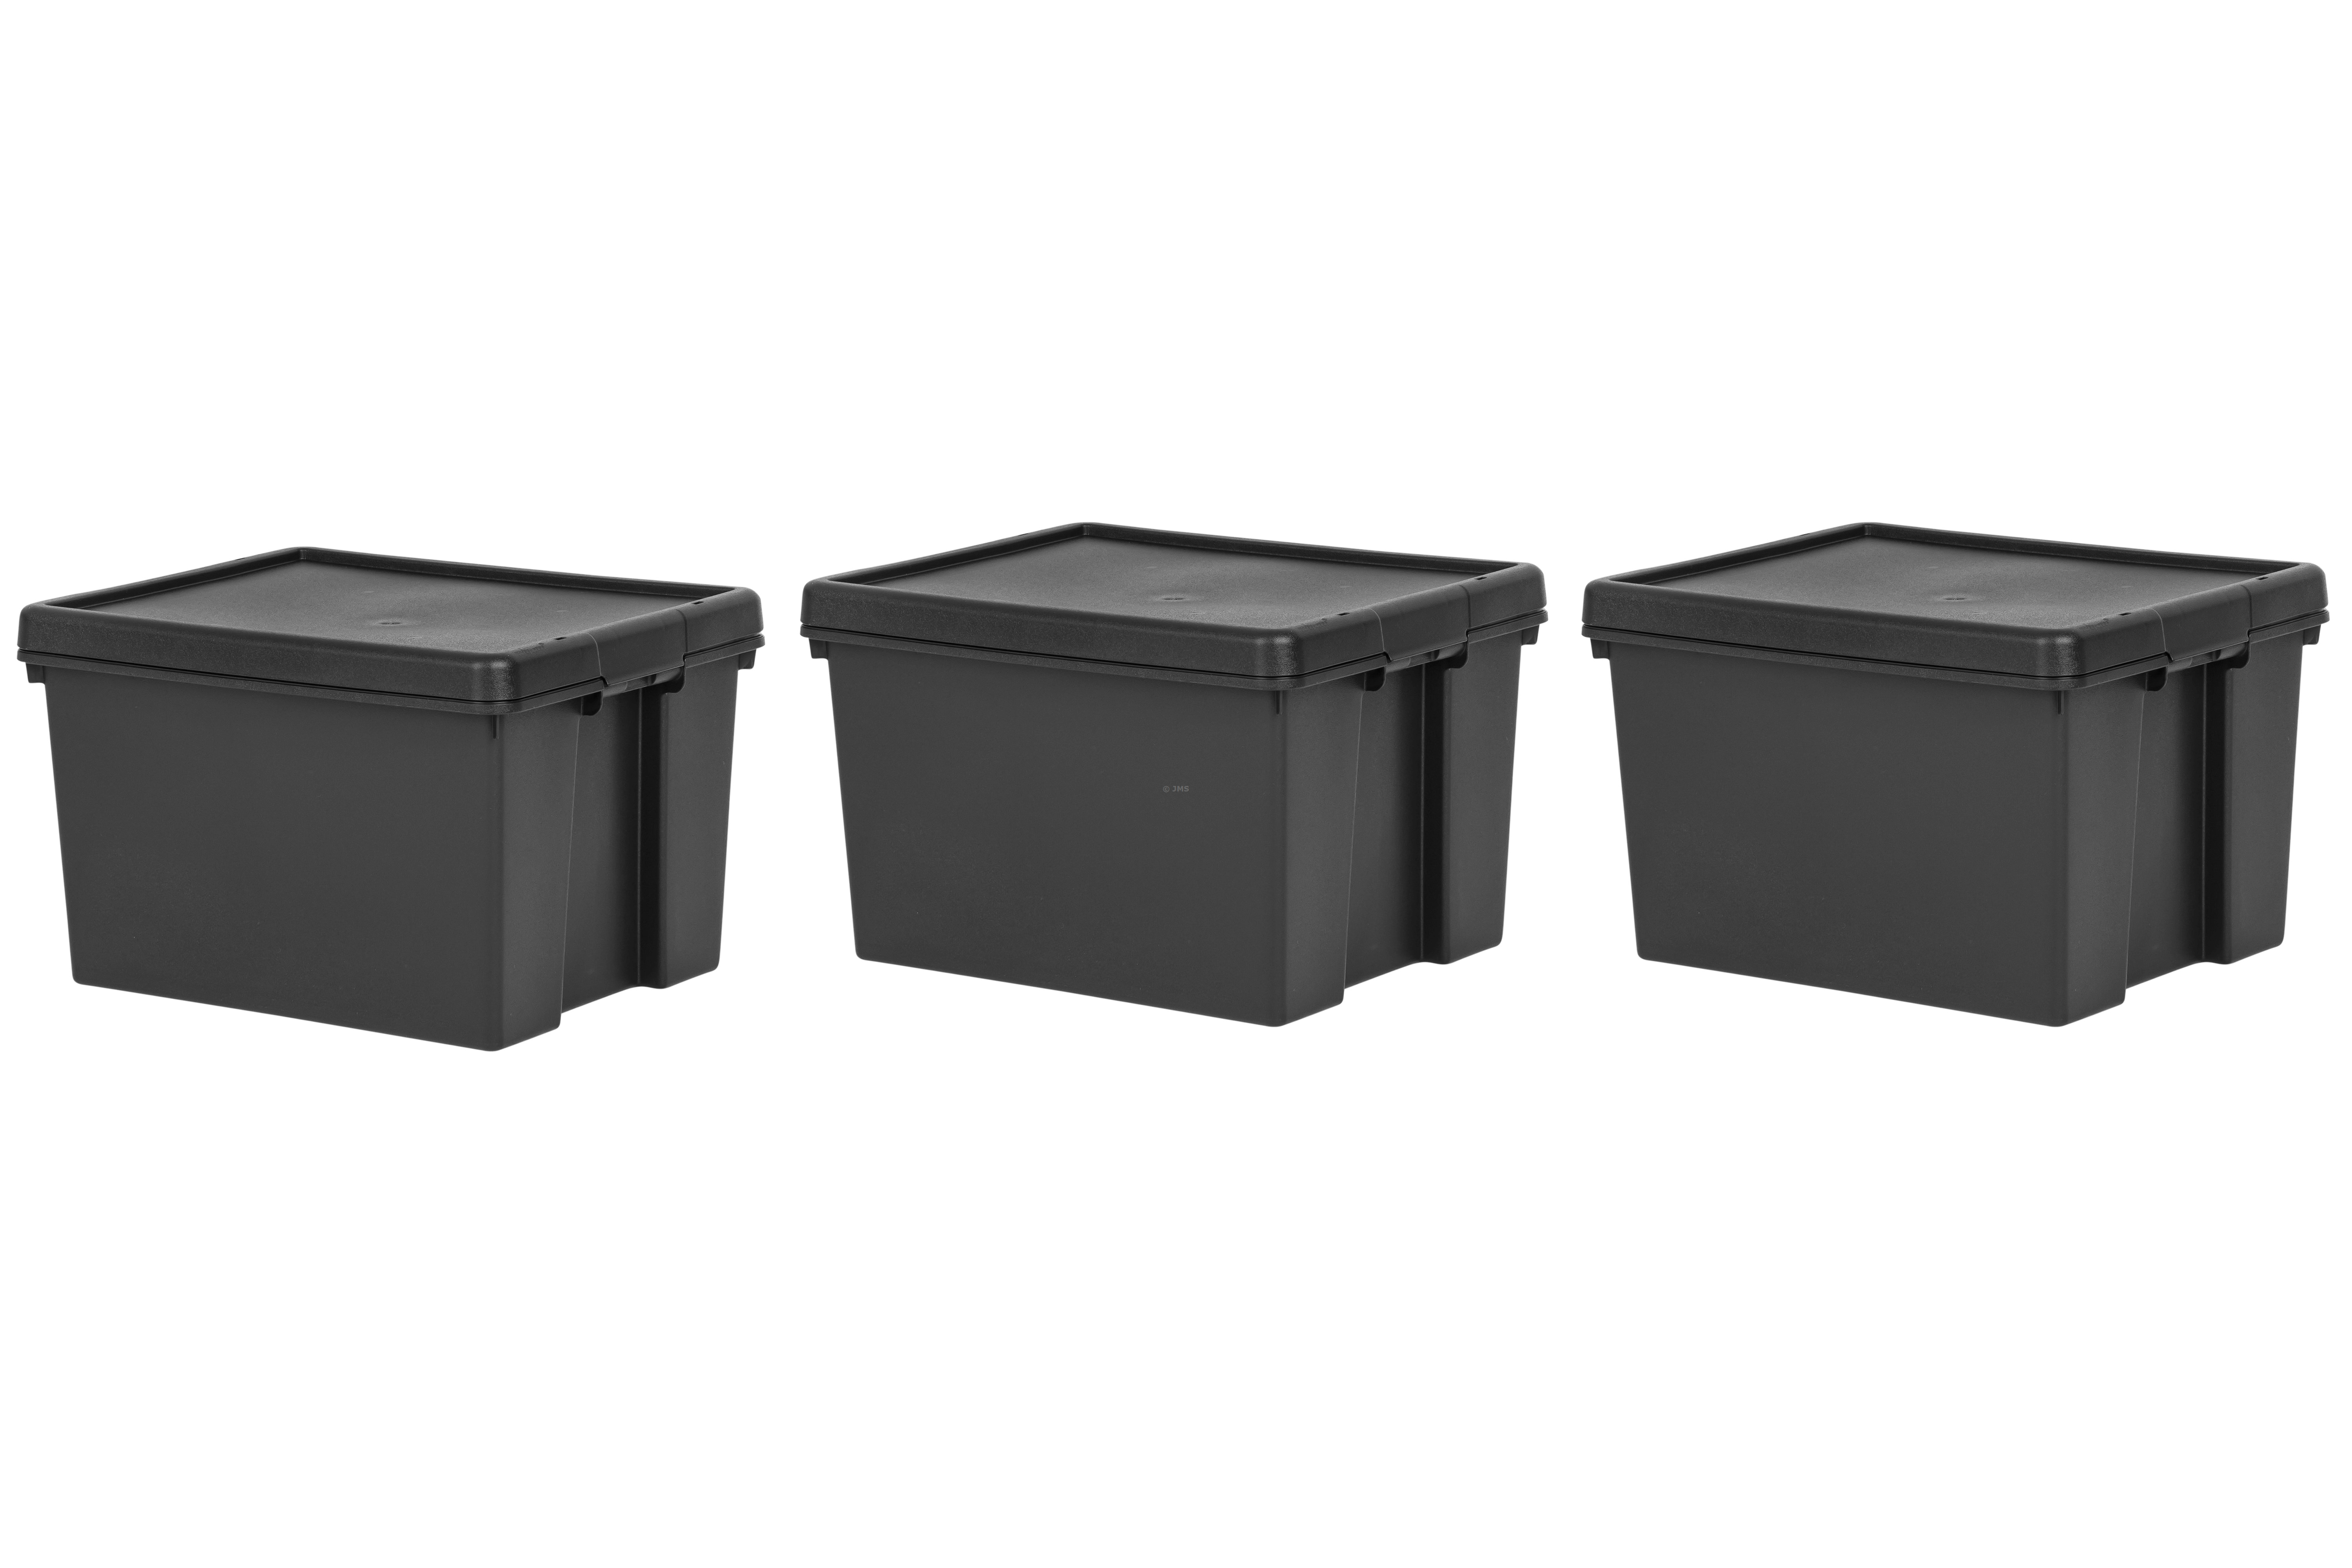 45L Black Stackable Storage Box with Lid, Pack of 3, Heavy Duty Recycled Plastic Nestable Containers Home Office Garage Toolbox